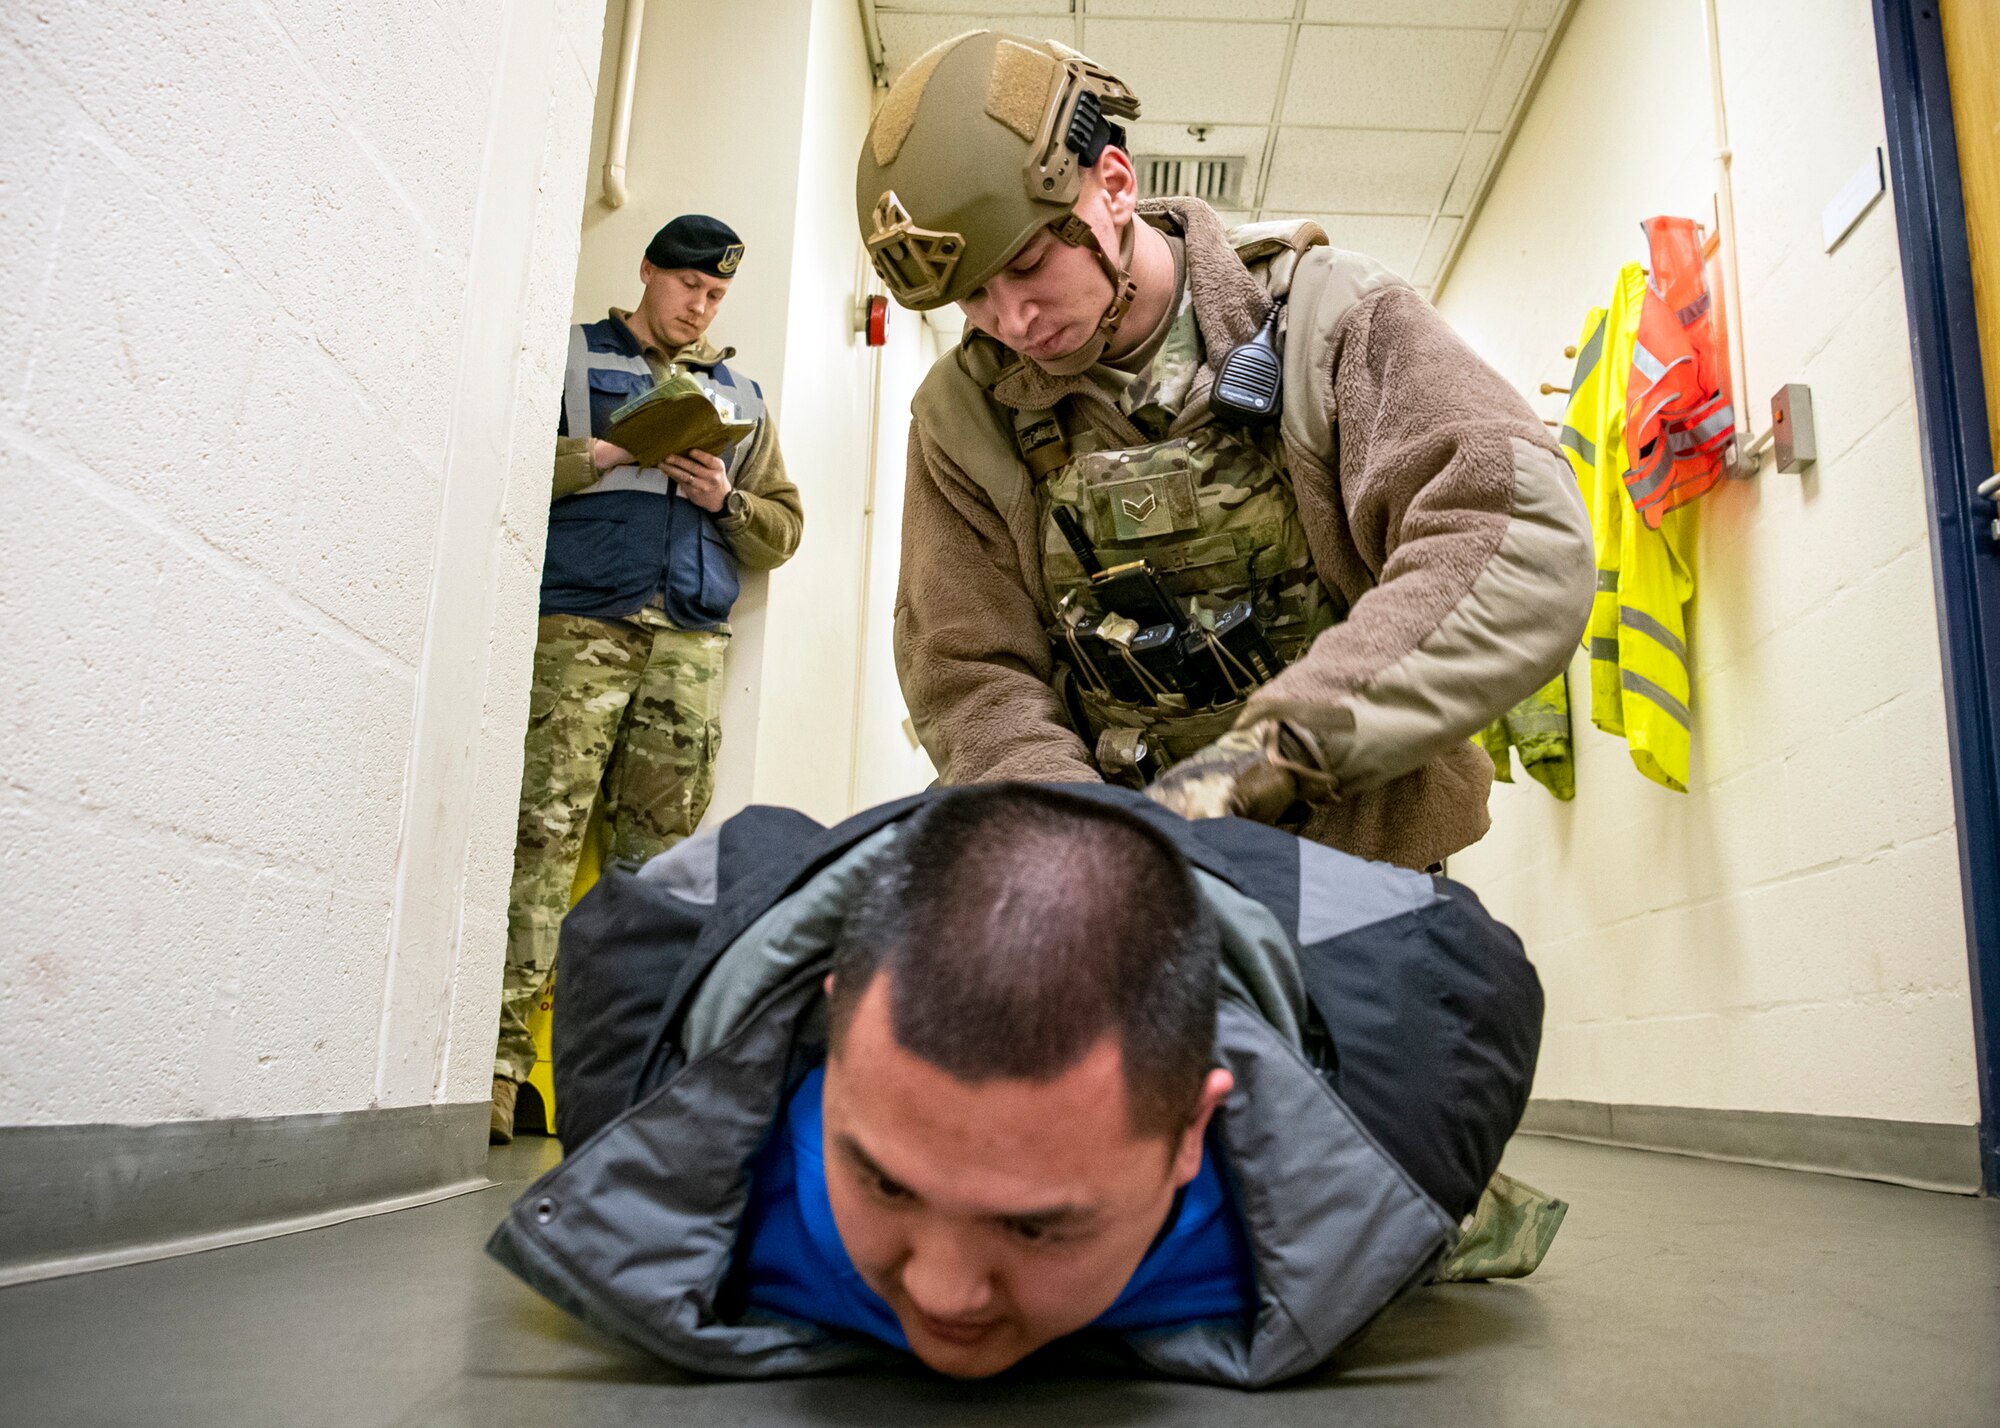 Senior Airman Dustin Kluge, (center), 423d Security Forces Squadron Emergency center controller, apprehends a simulated suspect during a readiness exercise, at RAF Molesworth, England, Feb. 11, 2020. The exercise tested the wing’s preparedness and response capabilities to an emergency situation. (U.S. Air Force photo by Senior Airman Eugene Oliver)